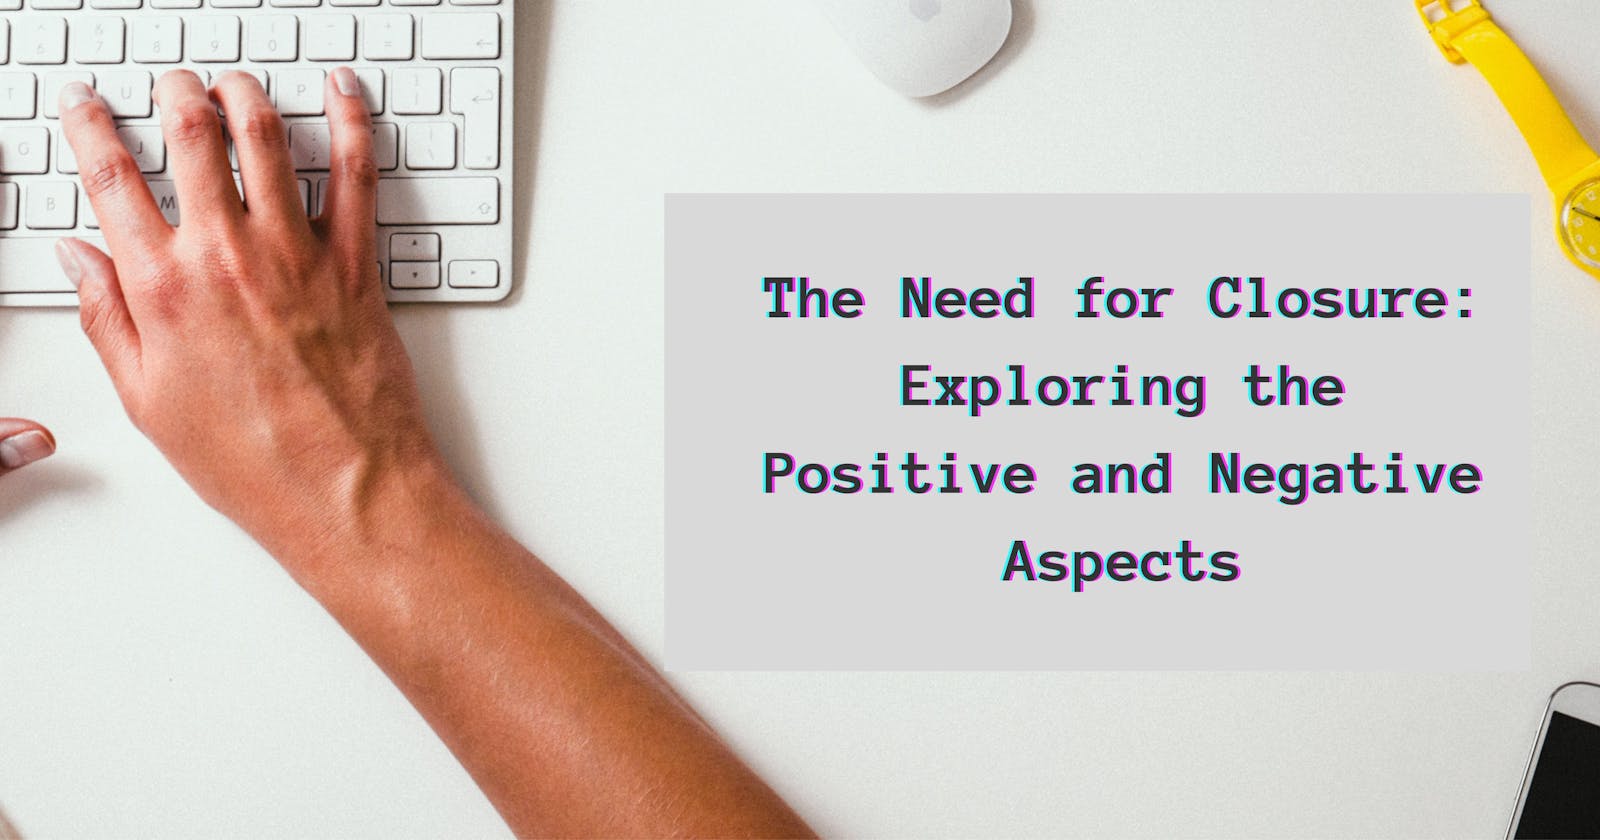 The Need for Closure: Exploring the Positive and Negative Aspects